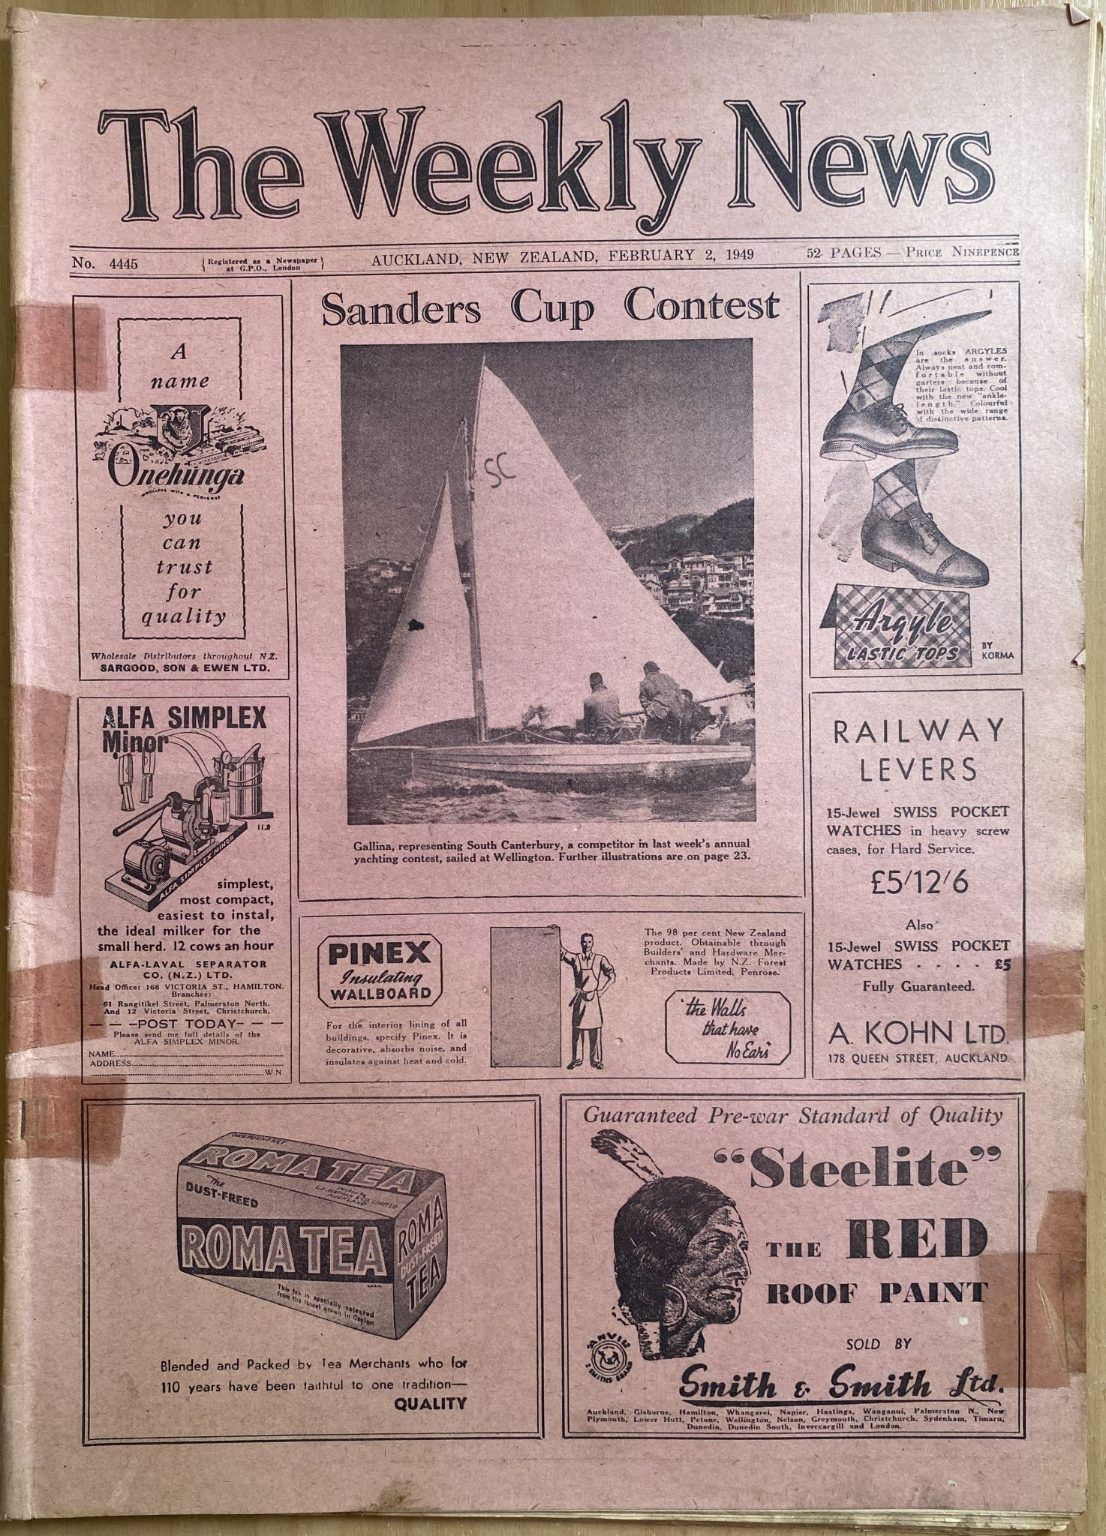 OLD NEWSPAPER: The Weekly News, No. 4445, 2 February 1949